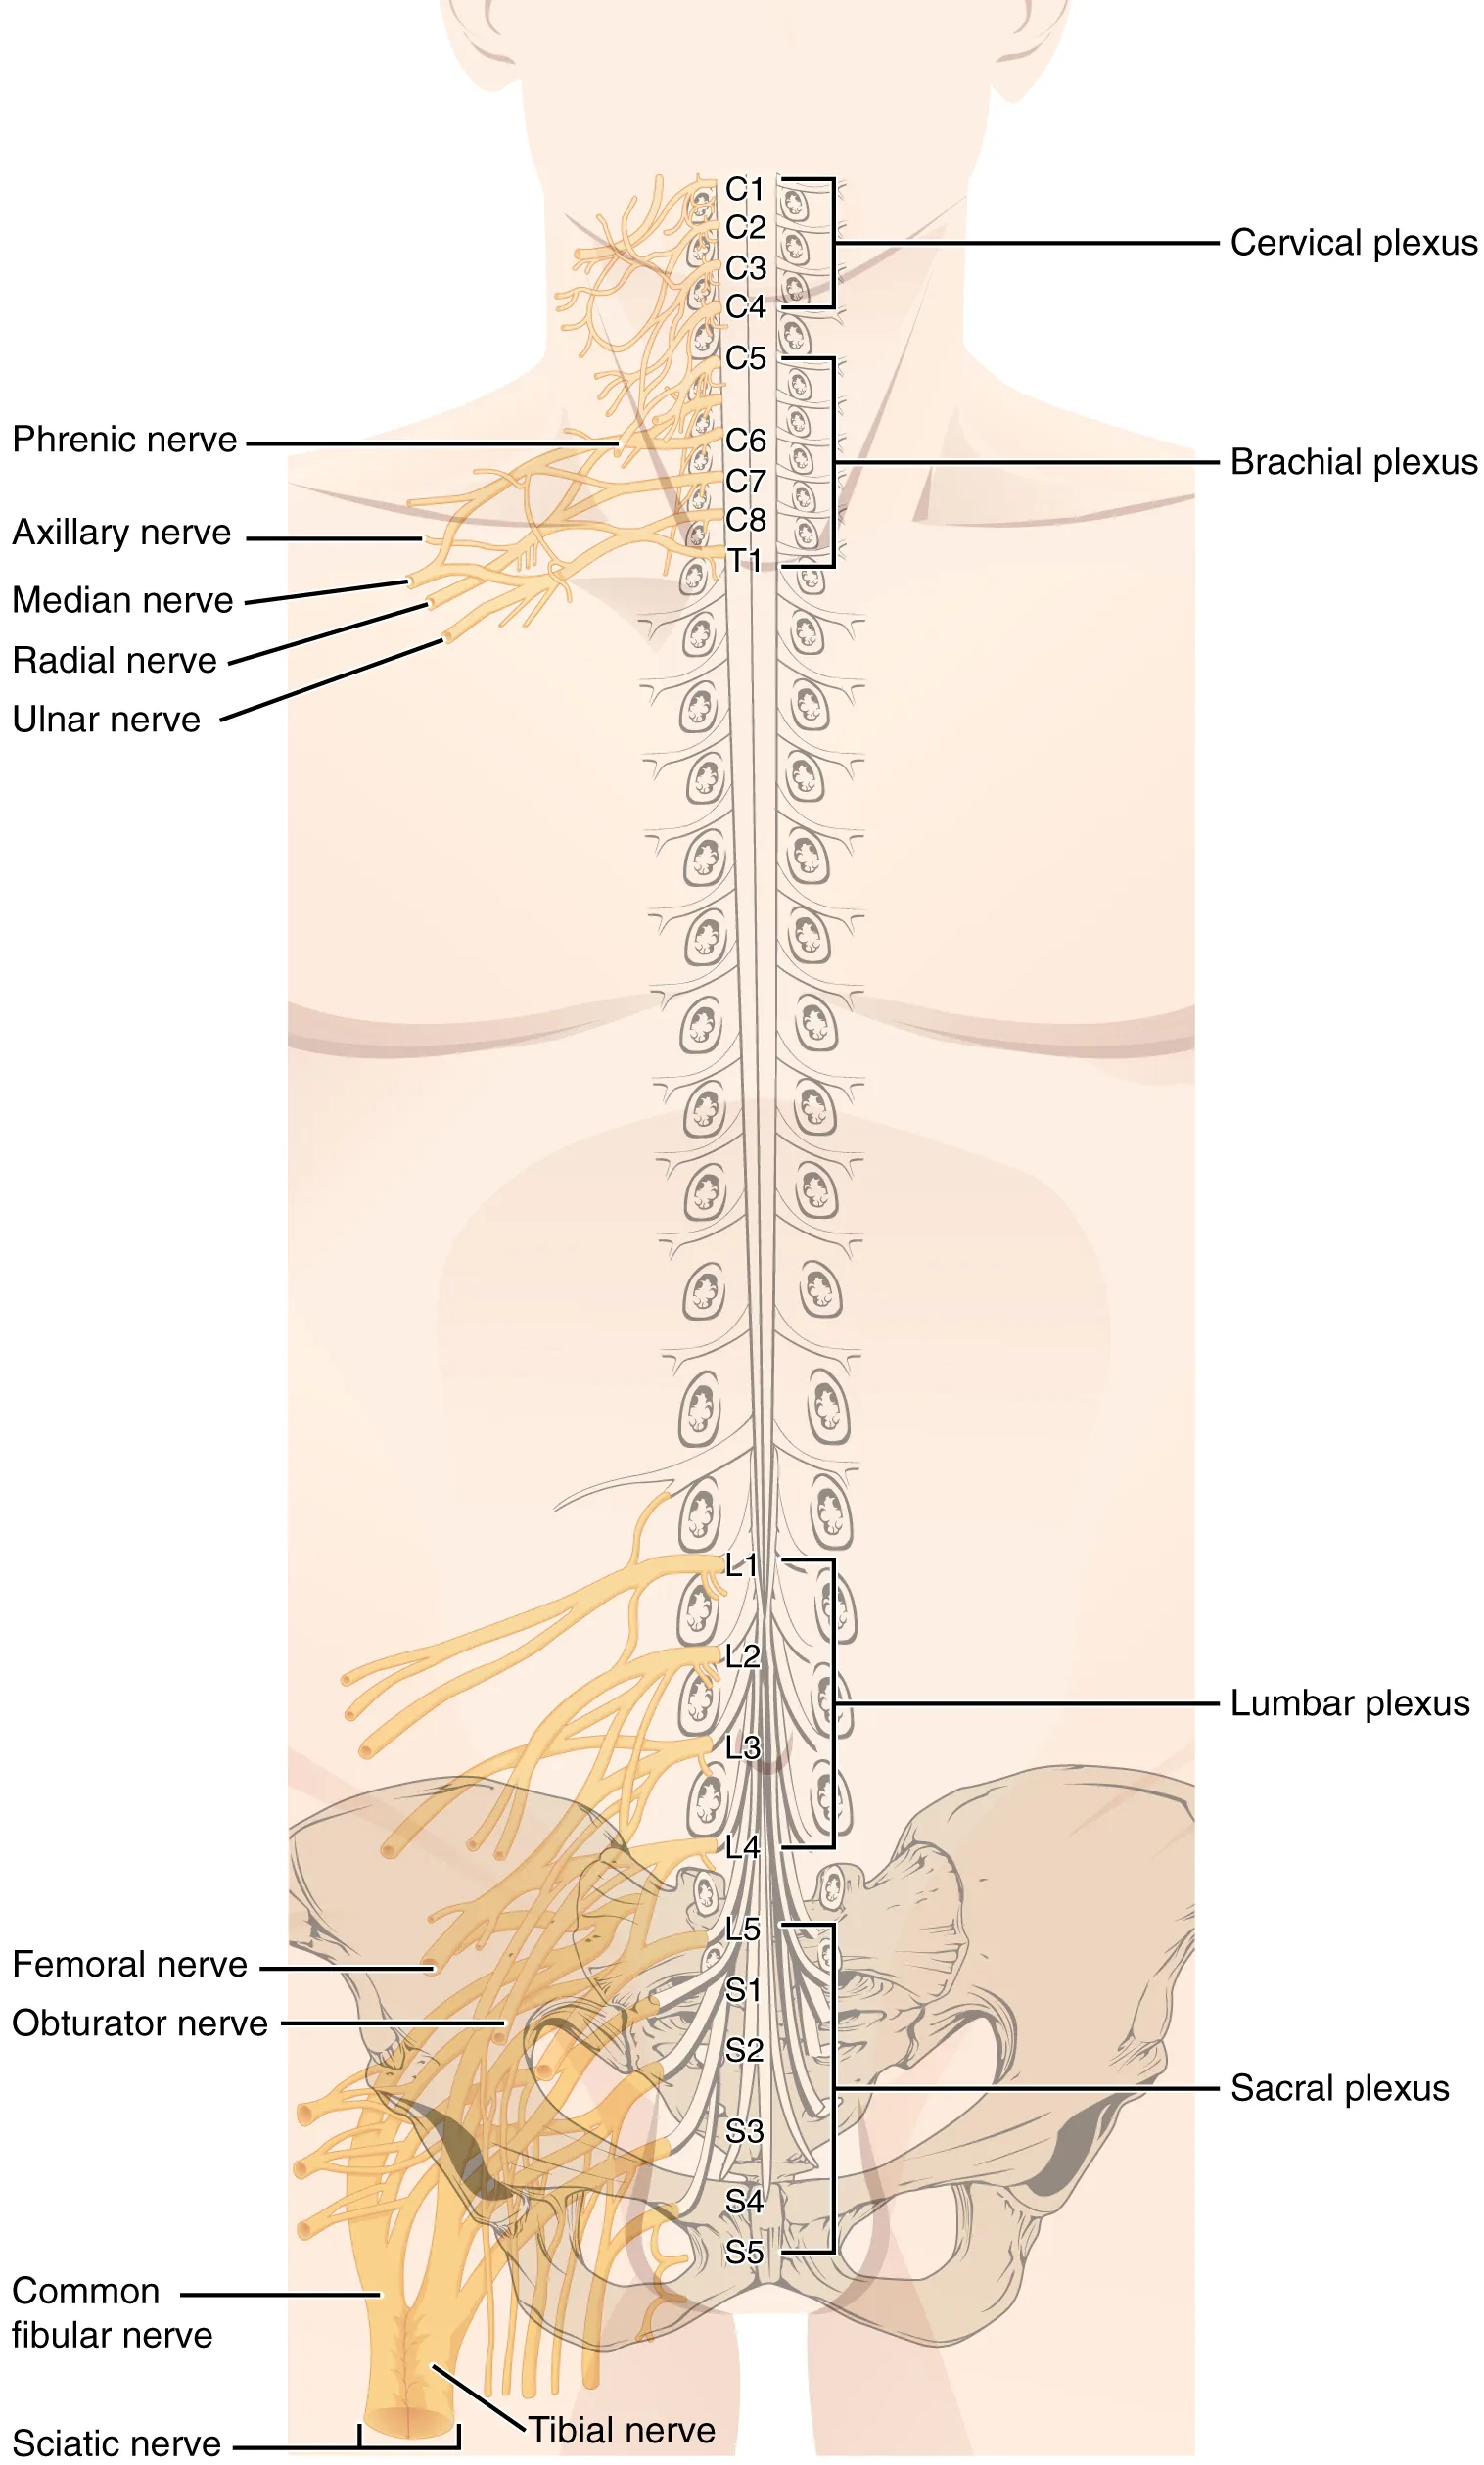 This figure shows a torso of a human body. The spinal cord is shown in the body and the main nerves along the spinal cord are labeled.